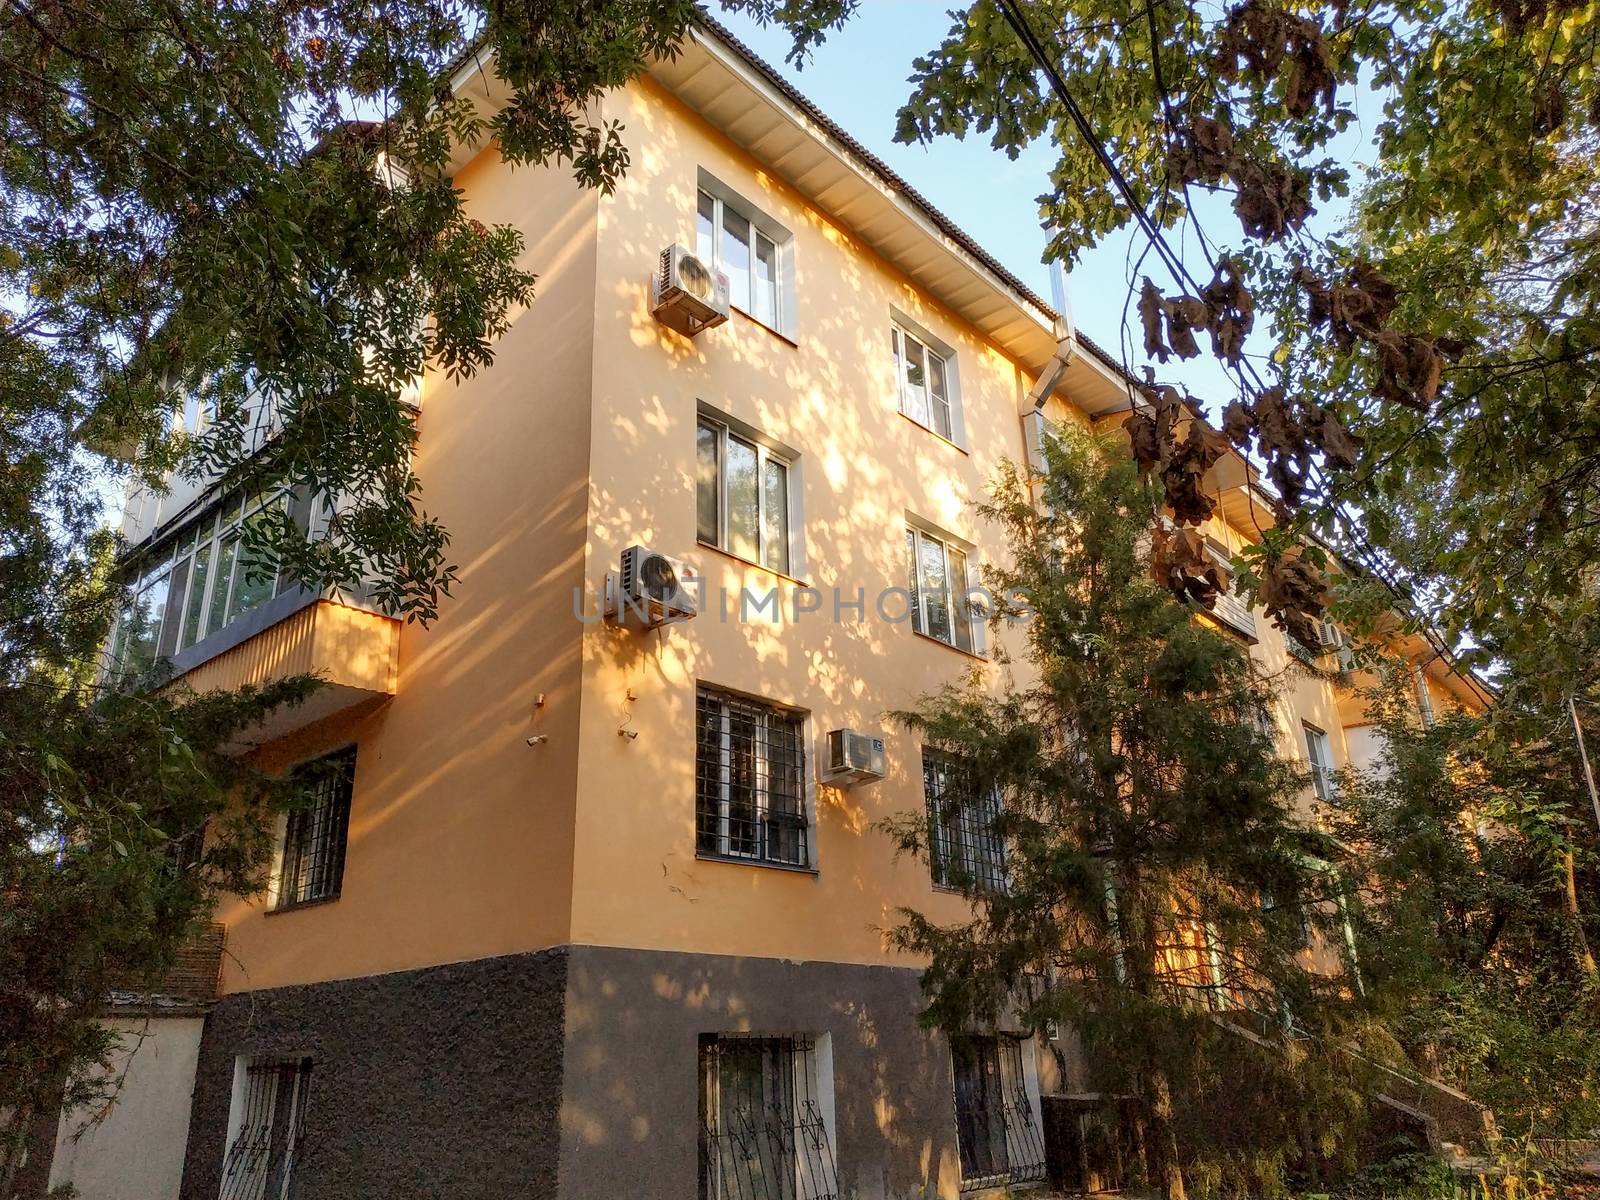 Almaty, Kazakhstan - August 28, 2019: Old houses along Nazarbayev street built in the middle of the 20th century